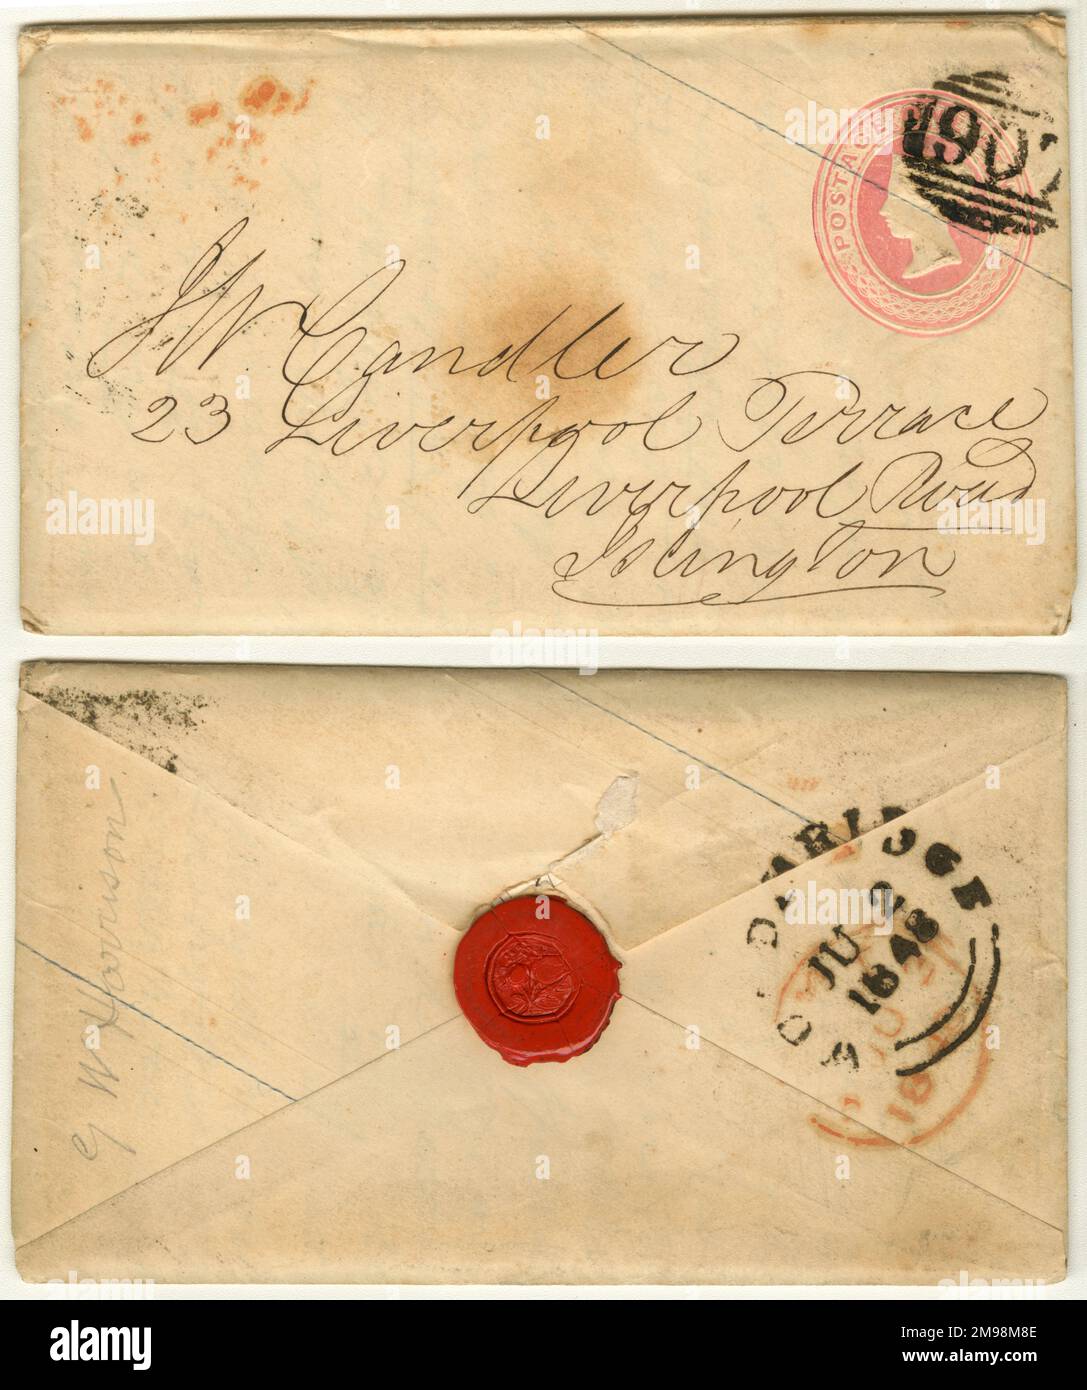 Envelope with sealing wax from Woodbridge, Suffolk, date stamped 2 June 1848, addressed to J W Candler, 23 Liverpool Terrace, Liverpool Road, Islington, North London, with a one penny Queen Victoria embossed stamp on it. Stock Photo